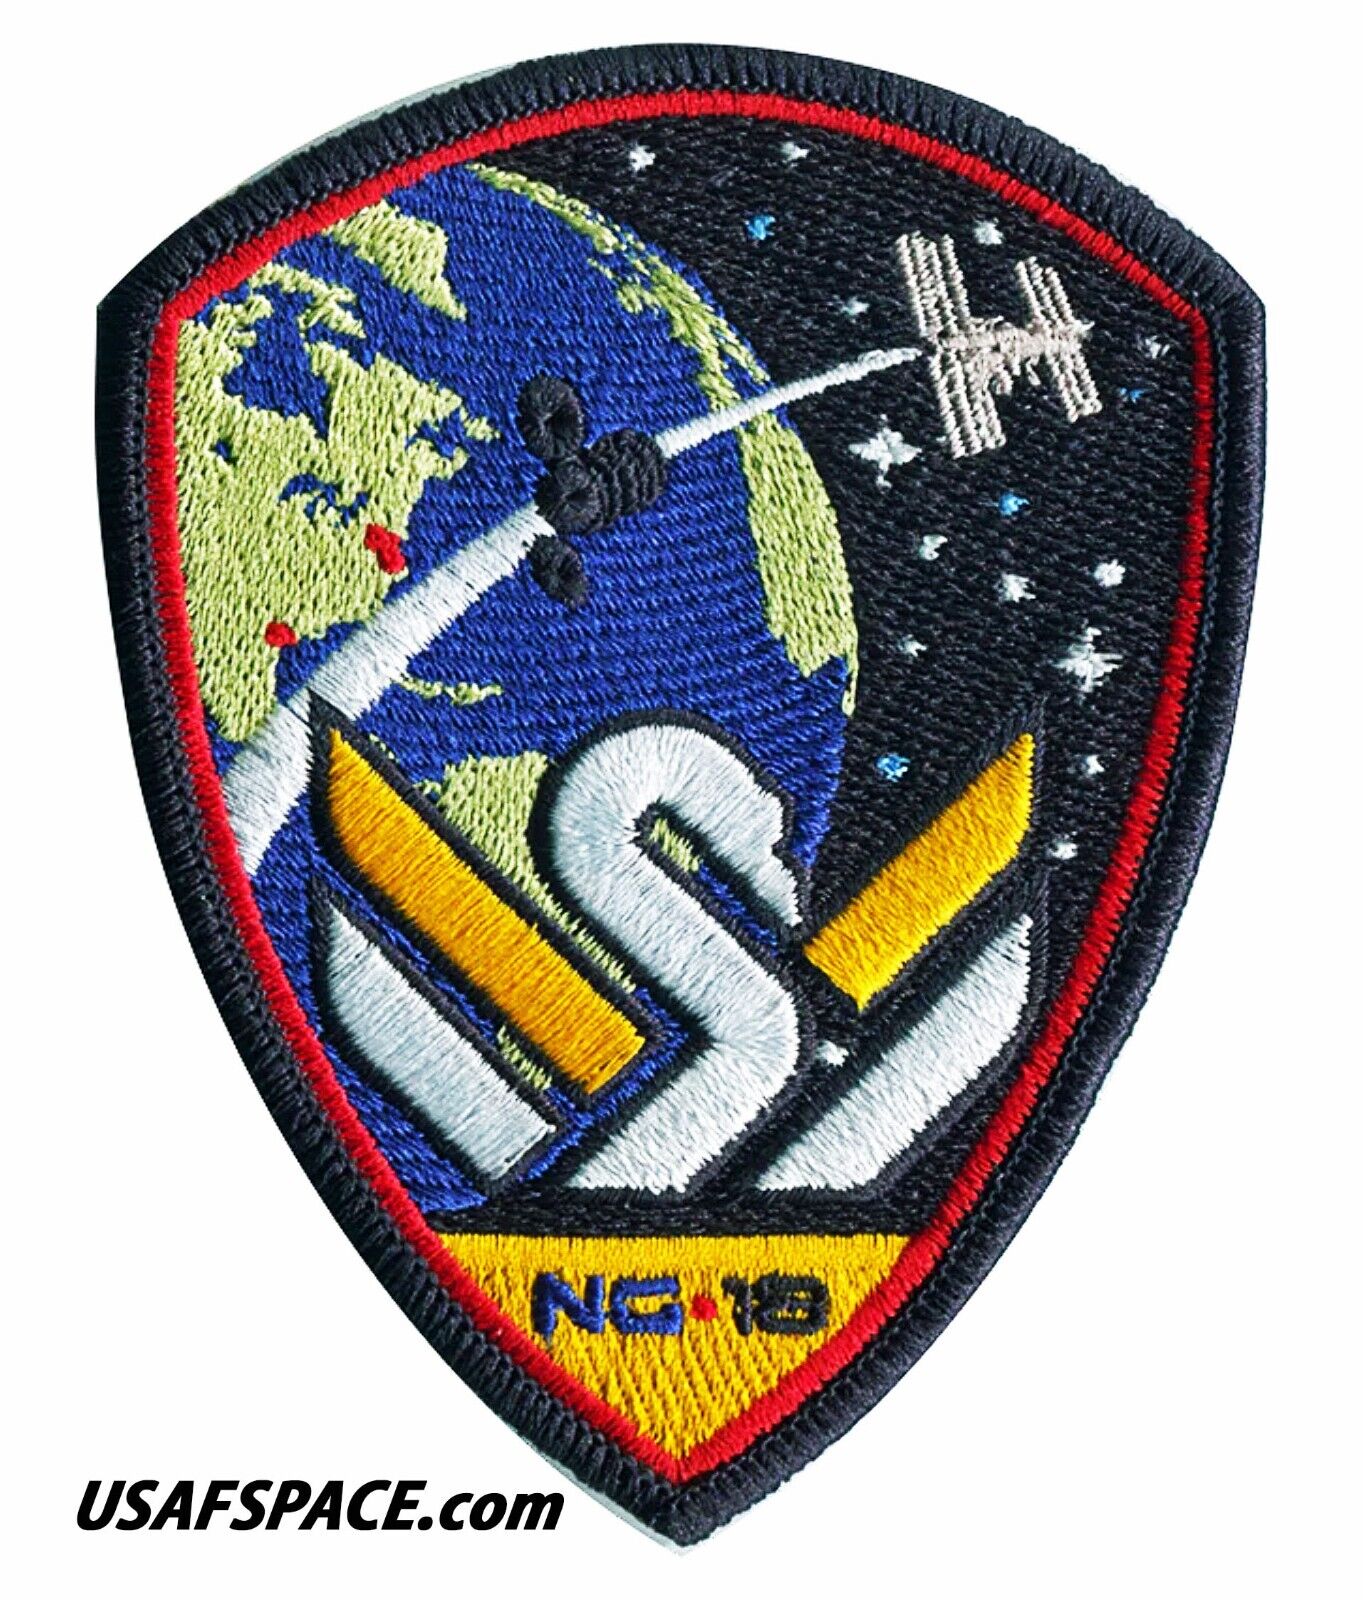 Authentic CYGNUS NG-18- Northrop Grumman- CRS ISS Mission- AB Emblem SPACE PATCH